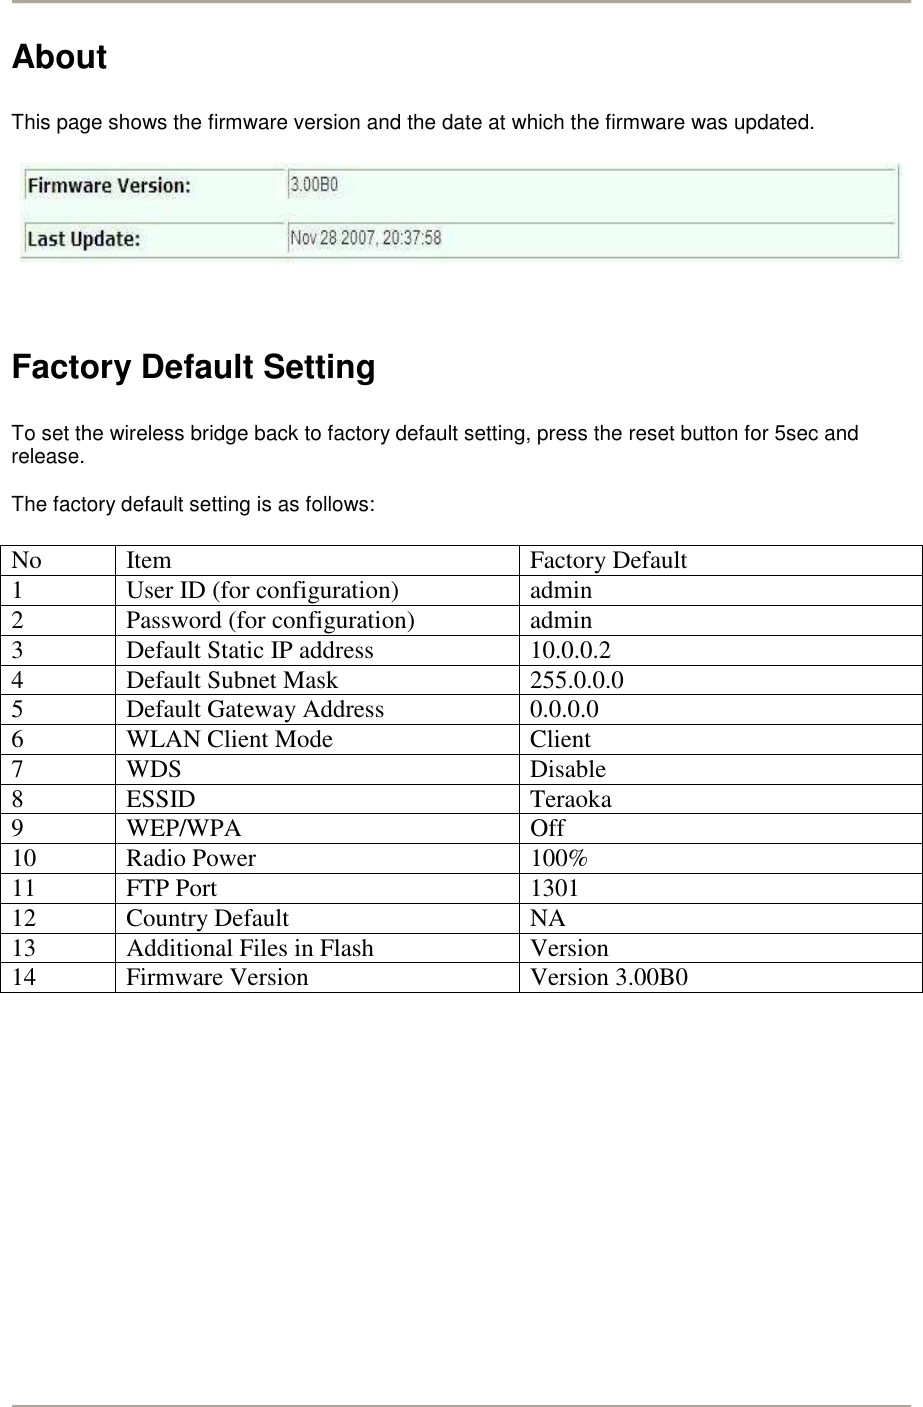        About  This page shows the firmware version and the date at which the firmware was updated.     Factory Default Setting  To set the wireless bridge back to factory default setting, press the reset button for 5sec and release.   The factory default setting is as follows:  No  Item  Factory Default 1  User ID (for configuration)  admin 2  Password (for configuration)  admin 3  Default Static IP address  10.0.0.2 4  Default Subnet Mask  255.0.0.0 5  Default Gateway Address  0.0.0.0 6  WLAN Client Mode  Client 7  WDS  Disable 8  ESSID  Teraoka 9  WEP/WPA  Off 10  Radio Power  100% 11  FTP Port  1301 12  Country Default  NA 13  Additional Files in Flash  Version 14  Firmware Version  Version 3.00B0    